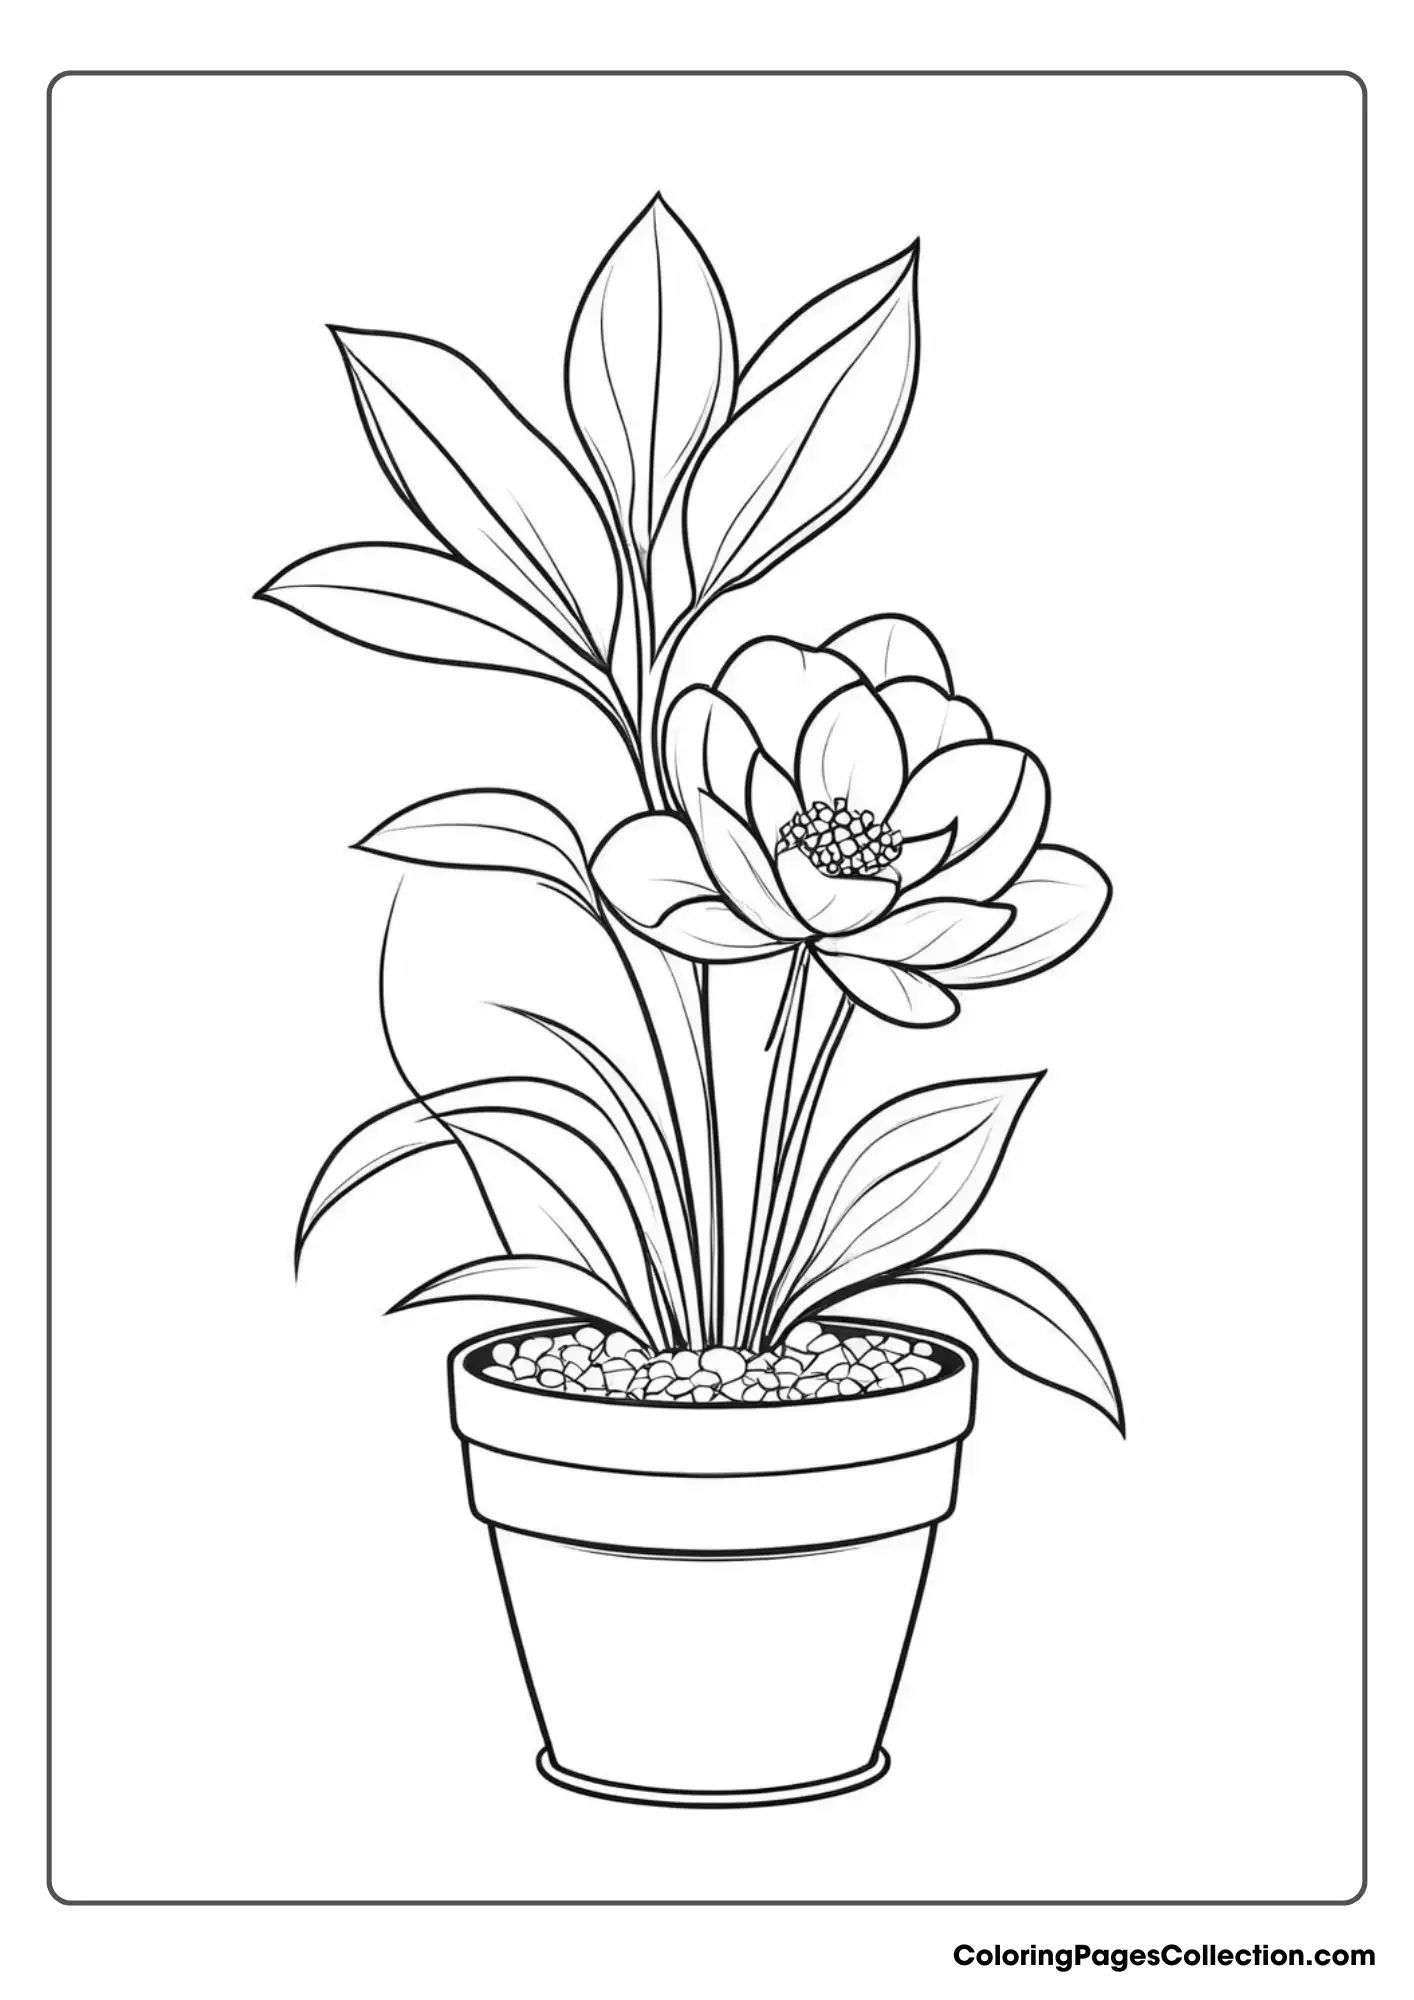 A Plant In A Pot Coloring Page